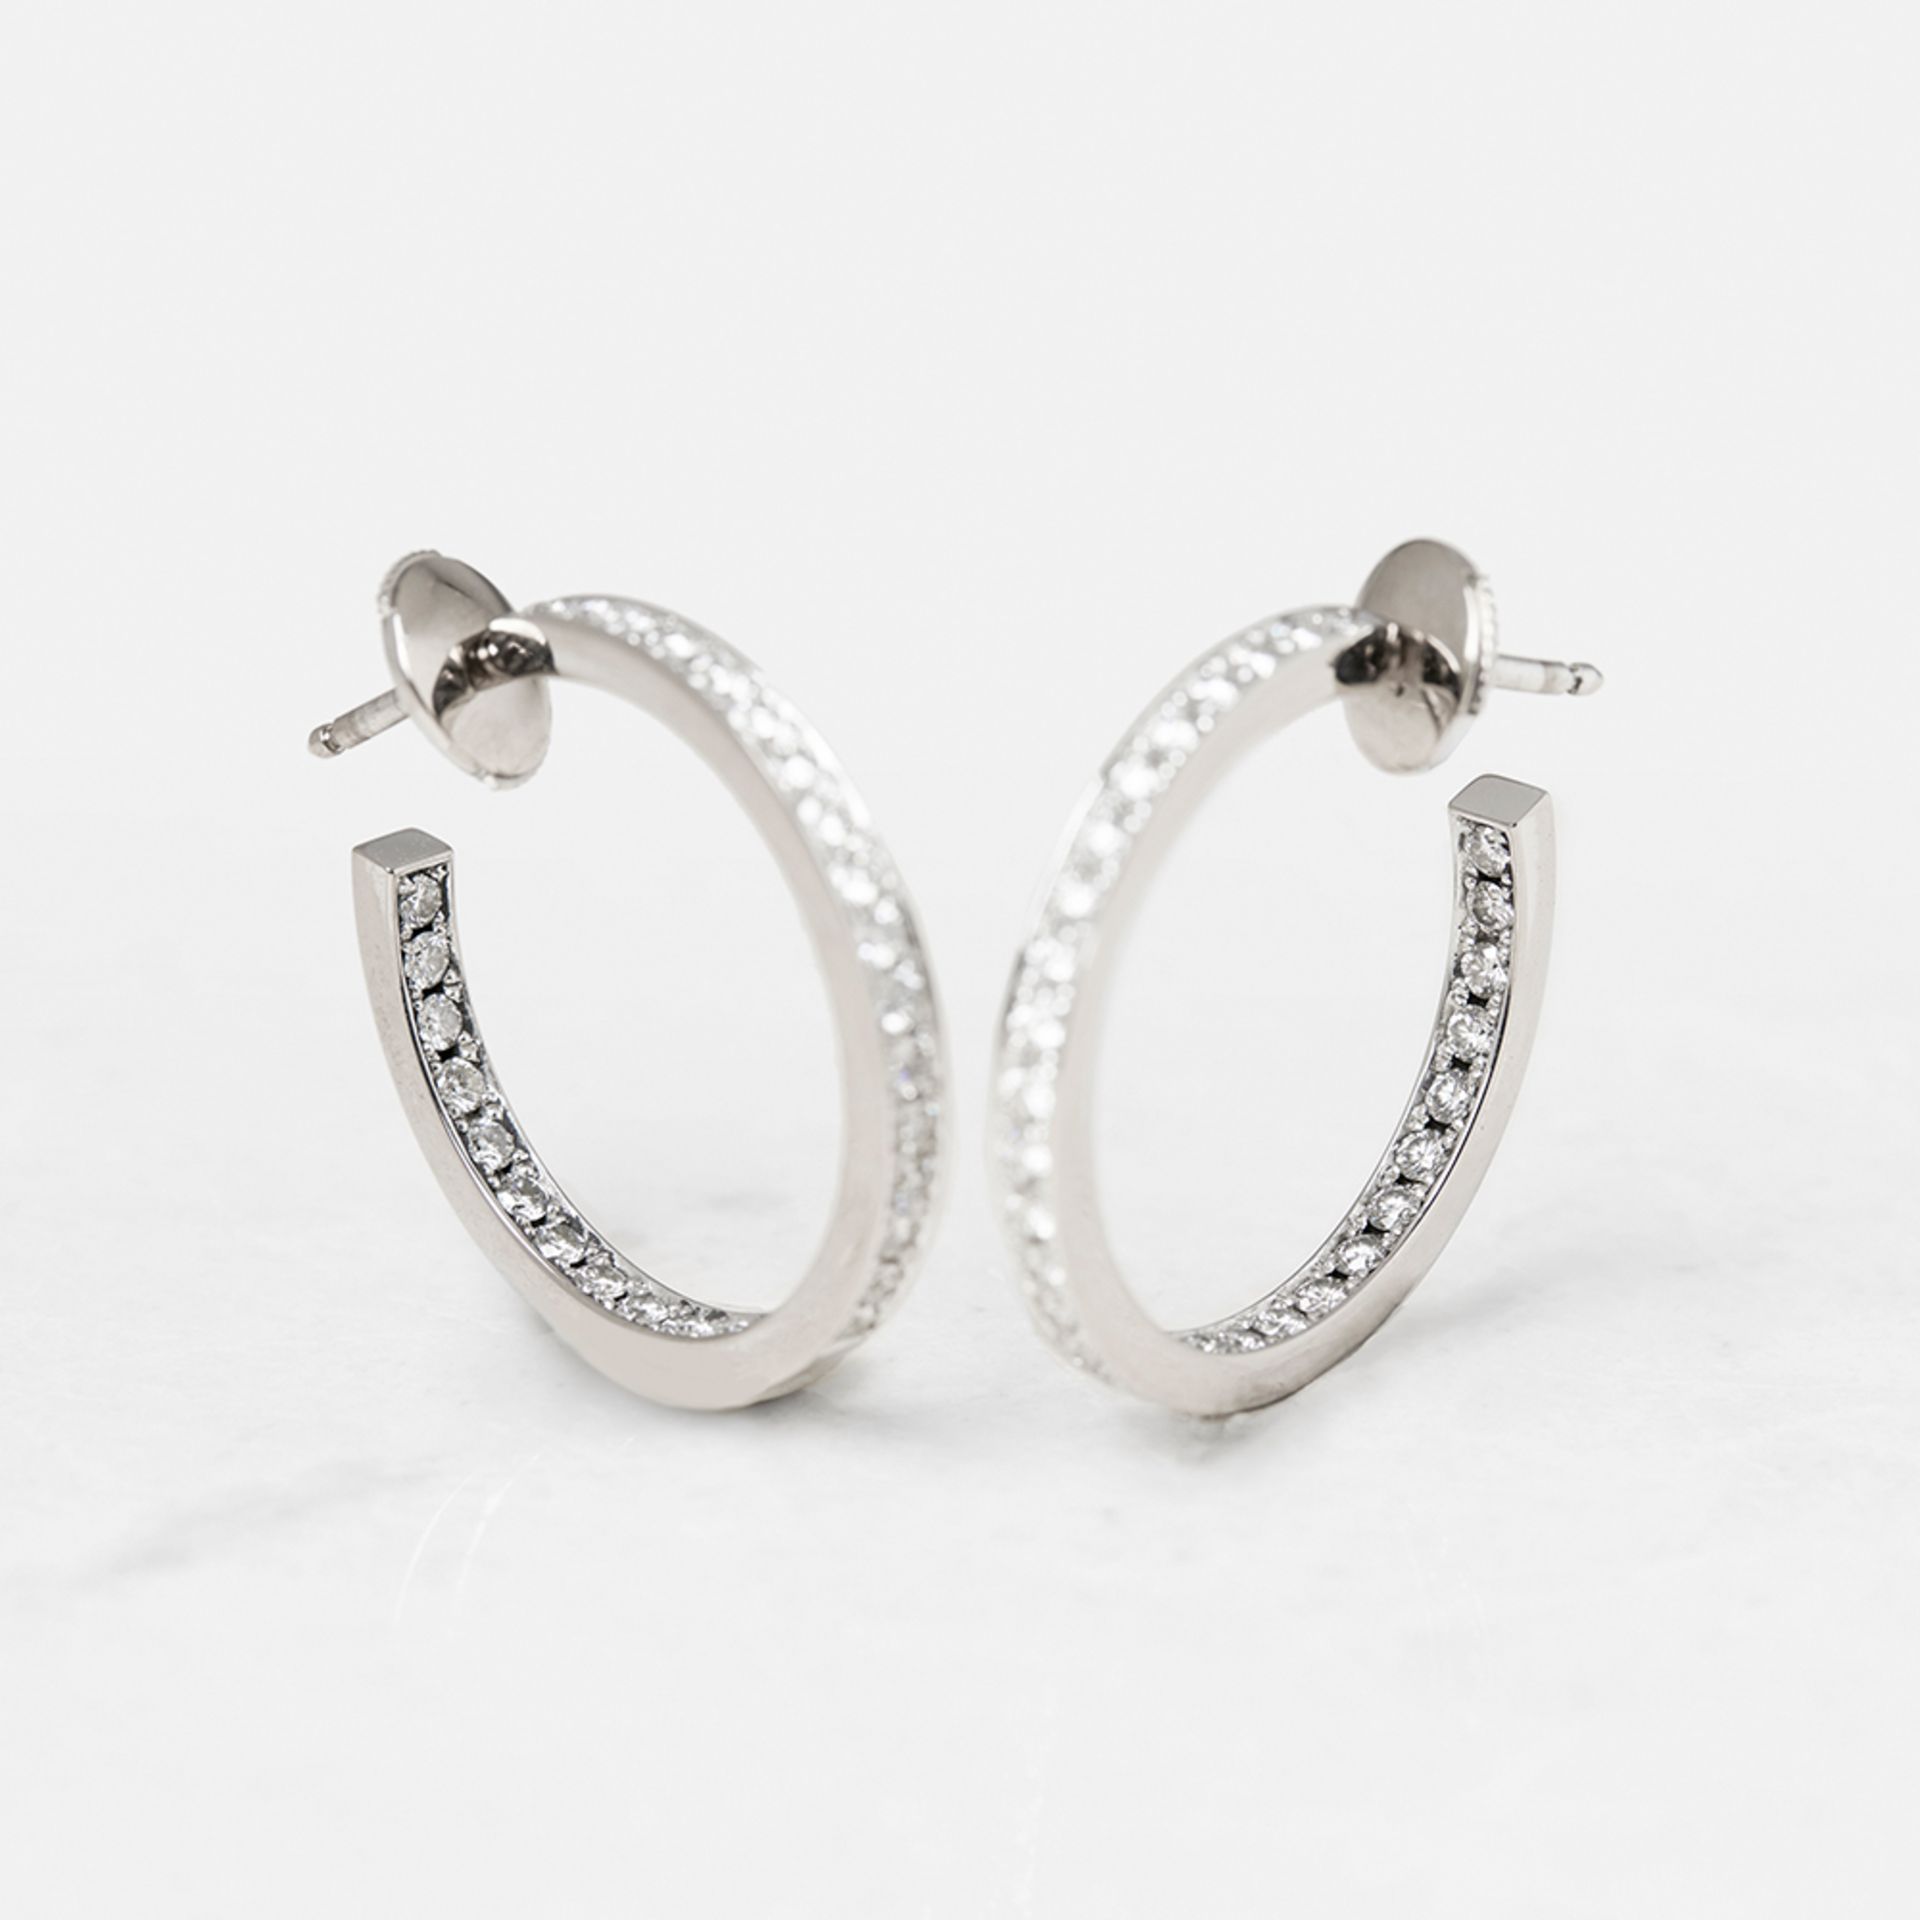 Cartier, 18k White Gold 1.20ct Diamond Inside Out Hoop Earrings - Image 12 of 14